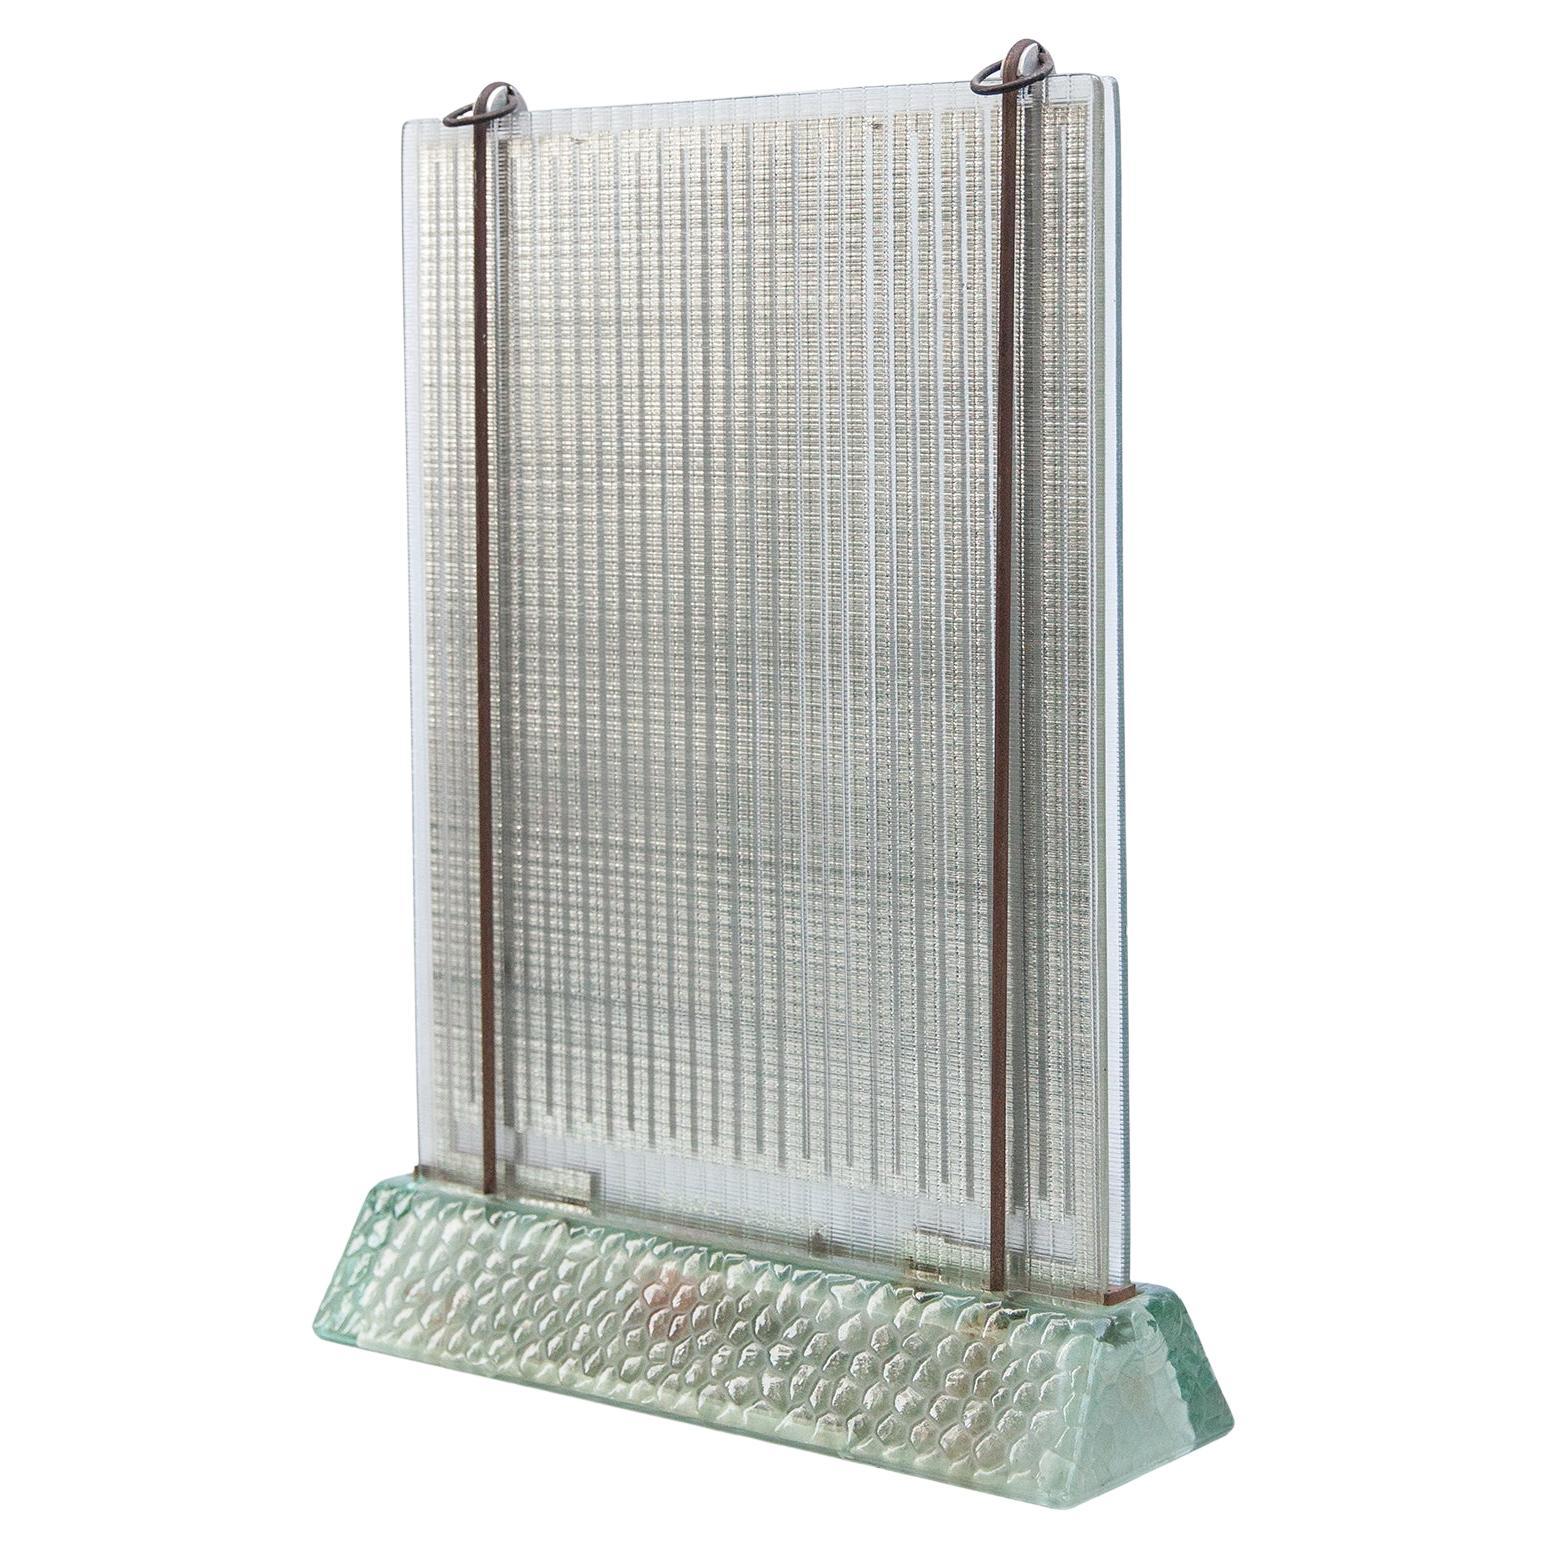 Glass Radiator by Rene-Andre Coulon for Saint-Goban, France, 1937 For Sale